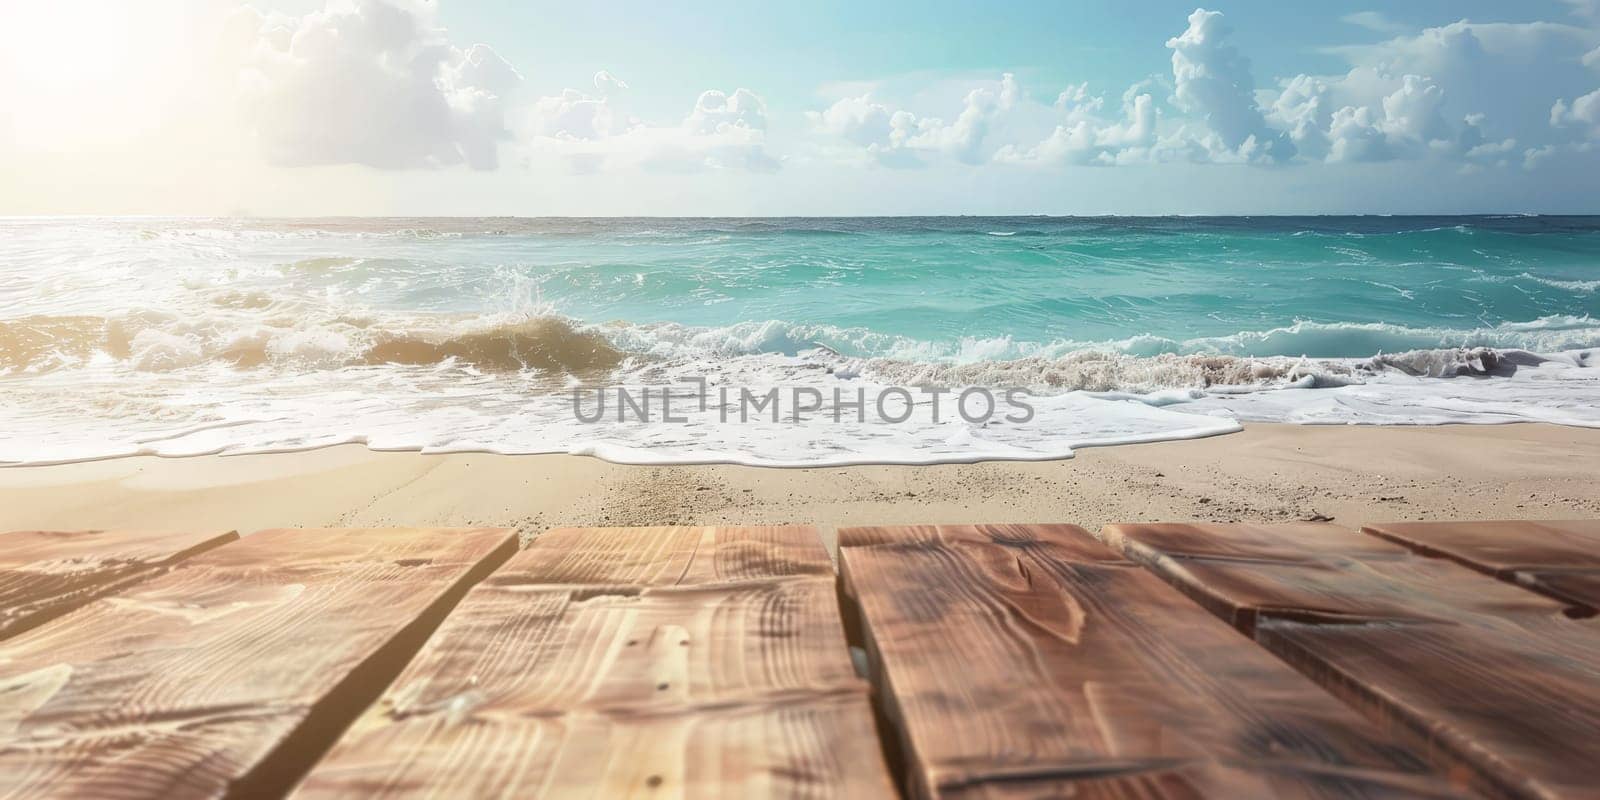 A wooden board is on the beach with the ocean in the background